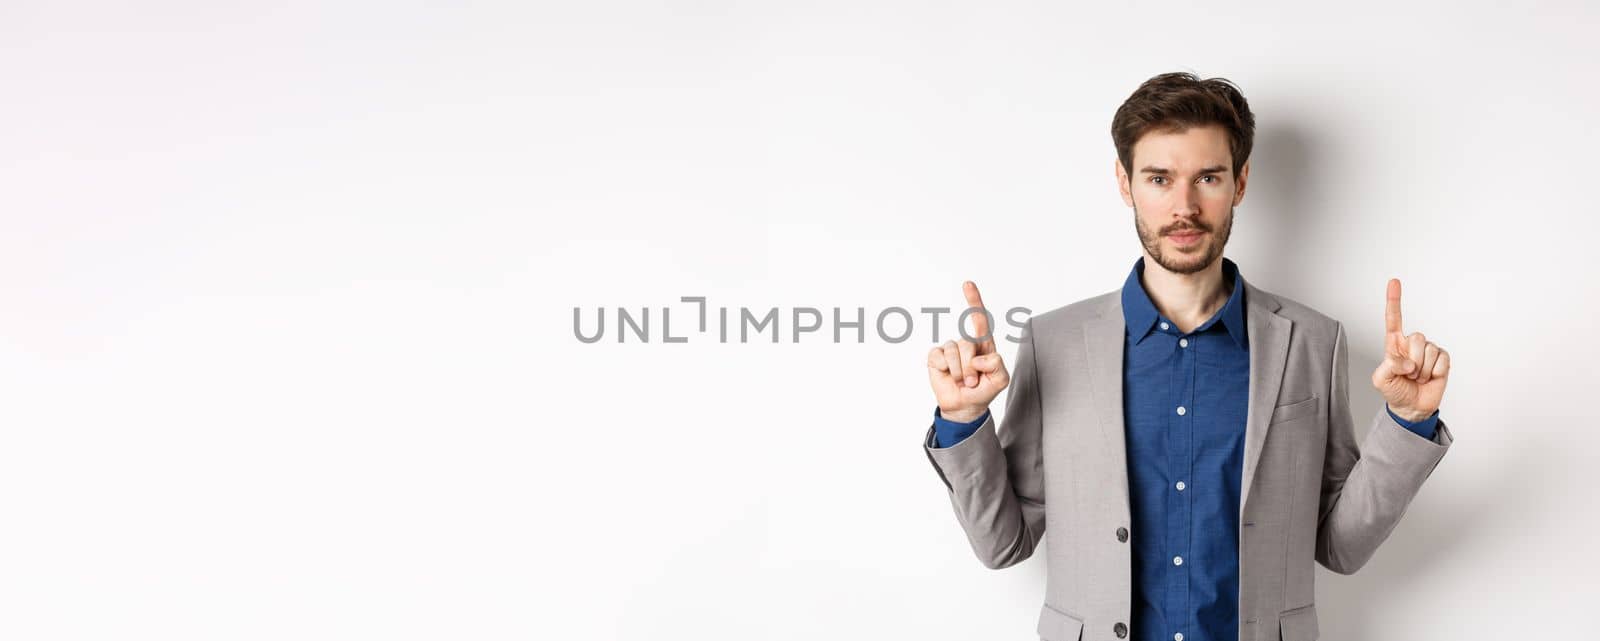 Serious businessman with beard wearing suit, pointing fingers up, look here gesture, advertising on white background.